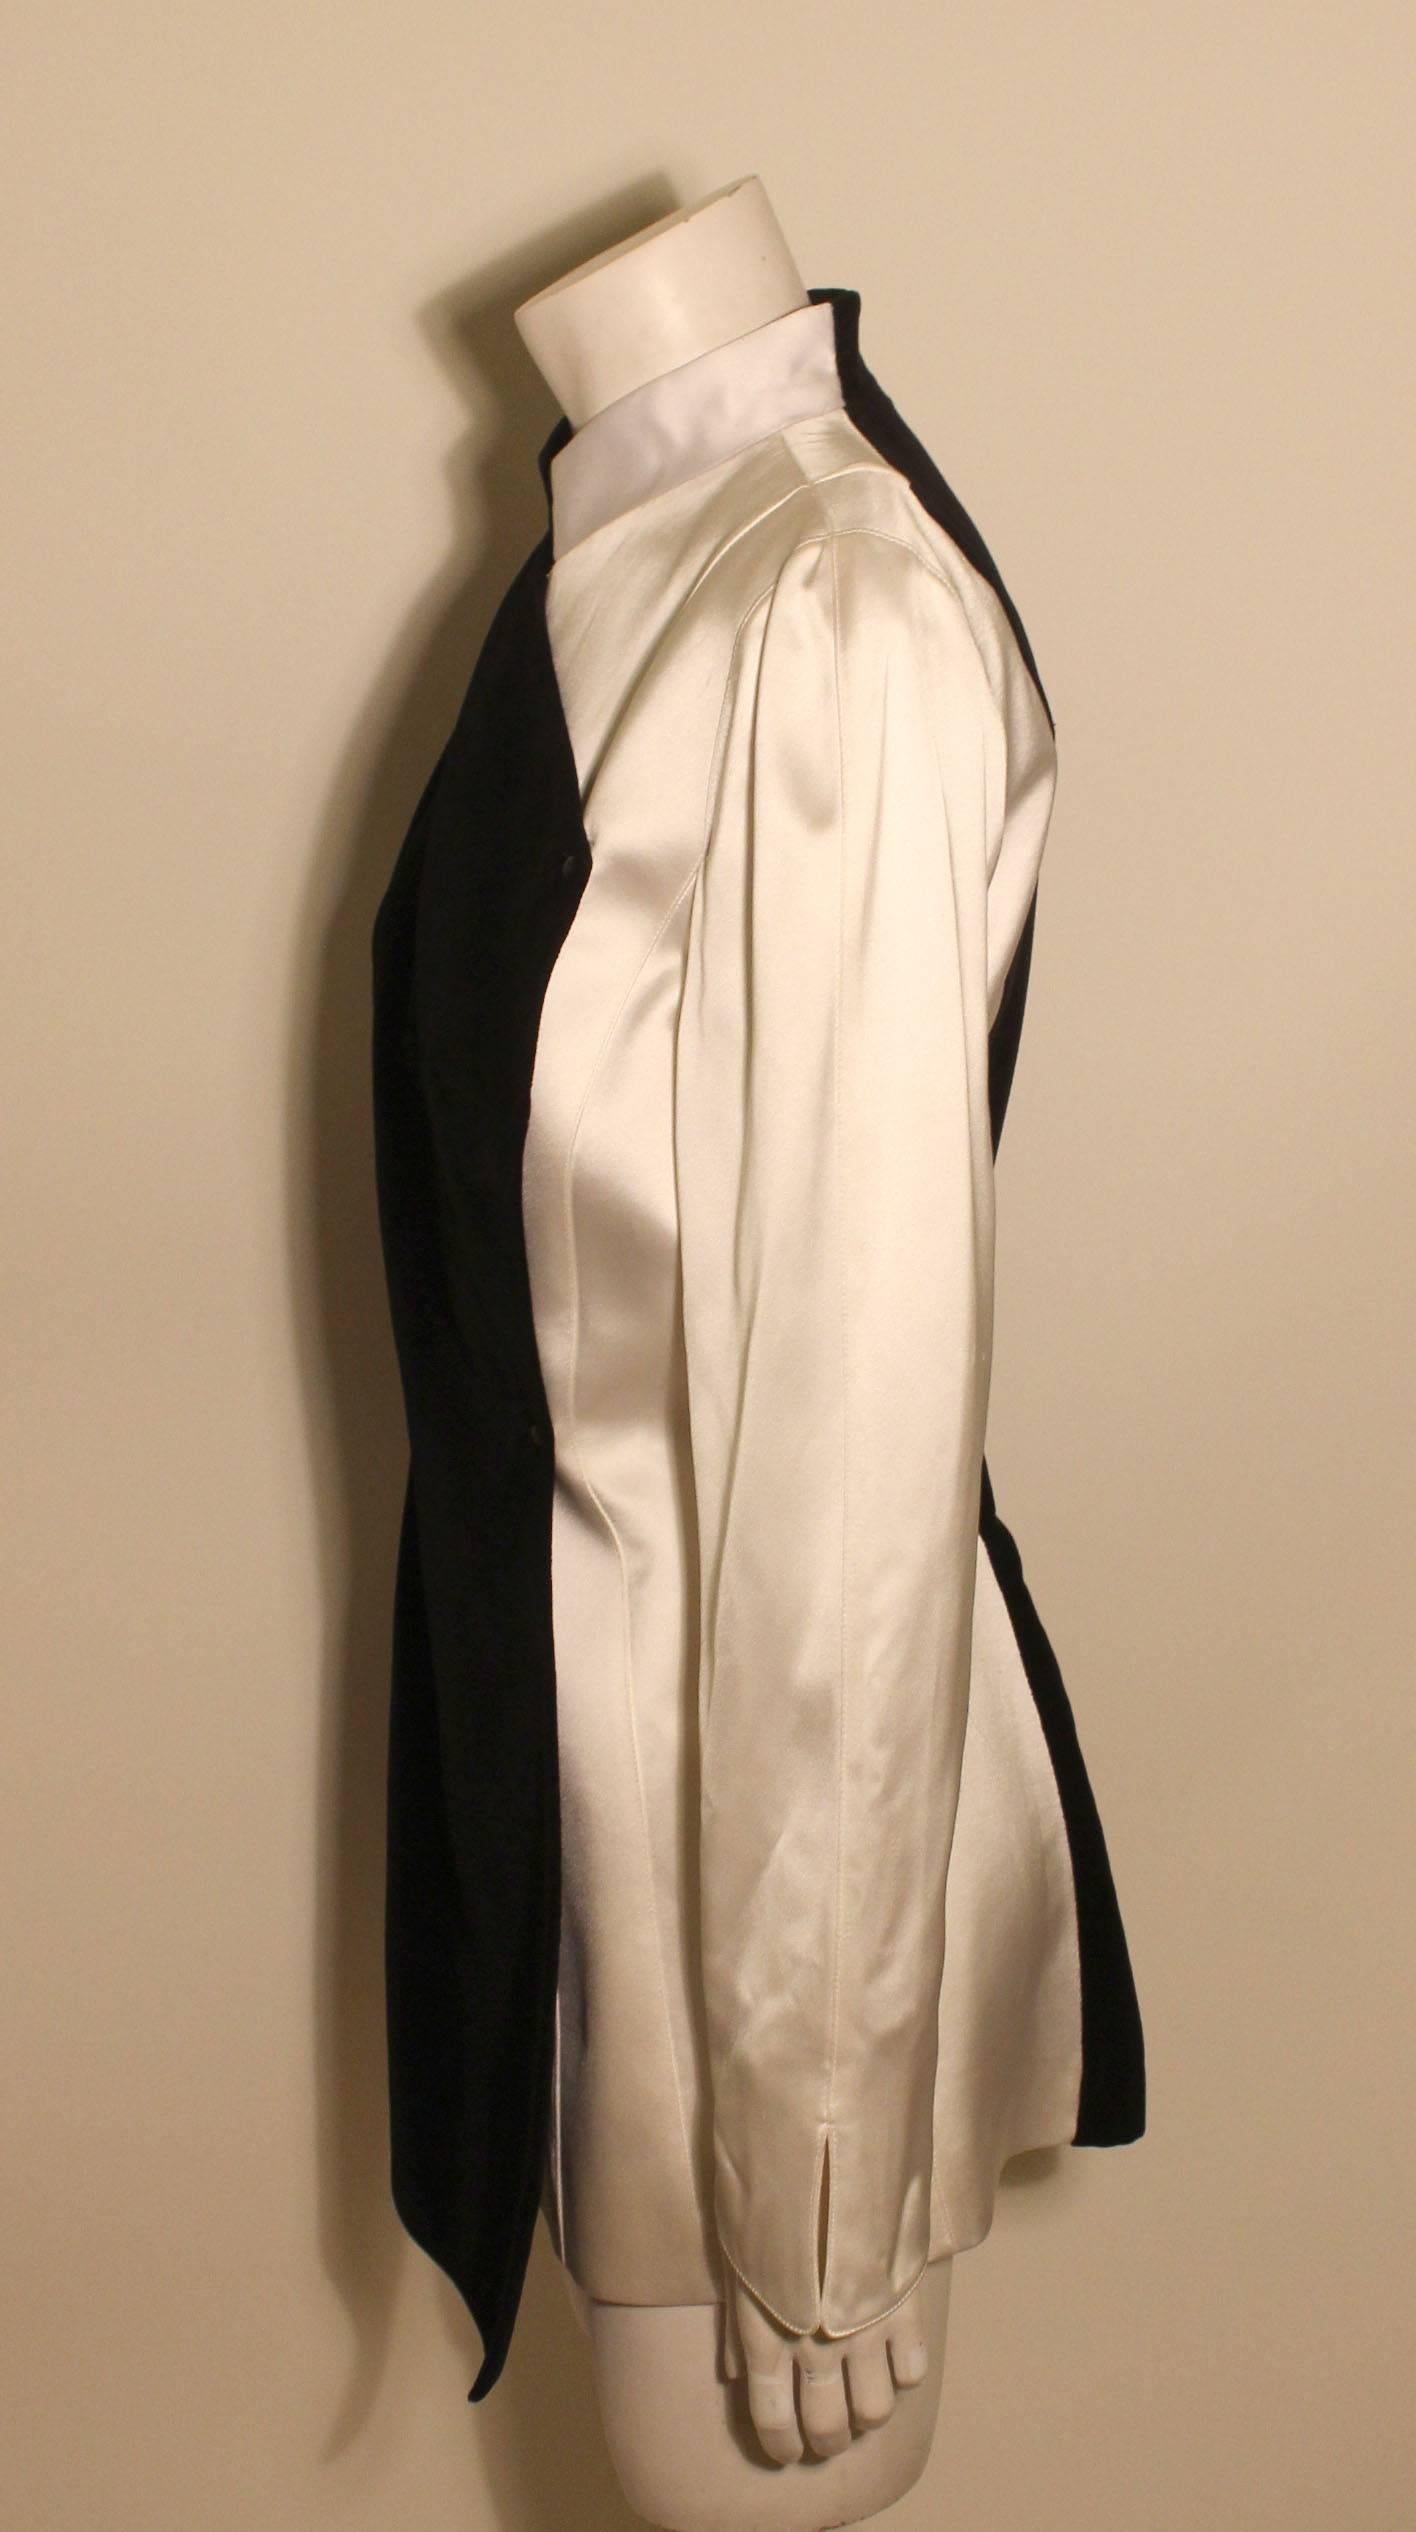 Thierry Mugler Stunning White Satin/Black Velvet Evening Jacket In Excellent Condition For Sale In New York, NY